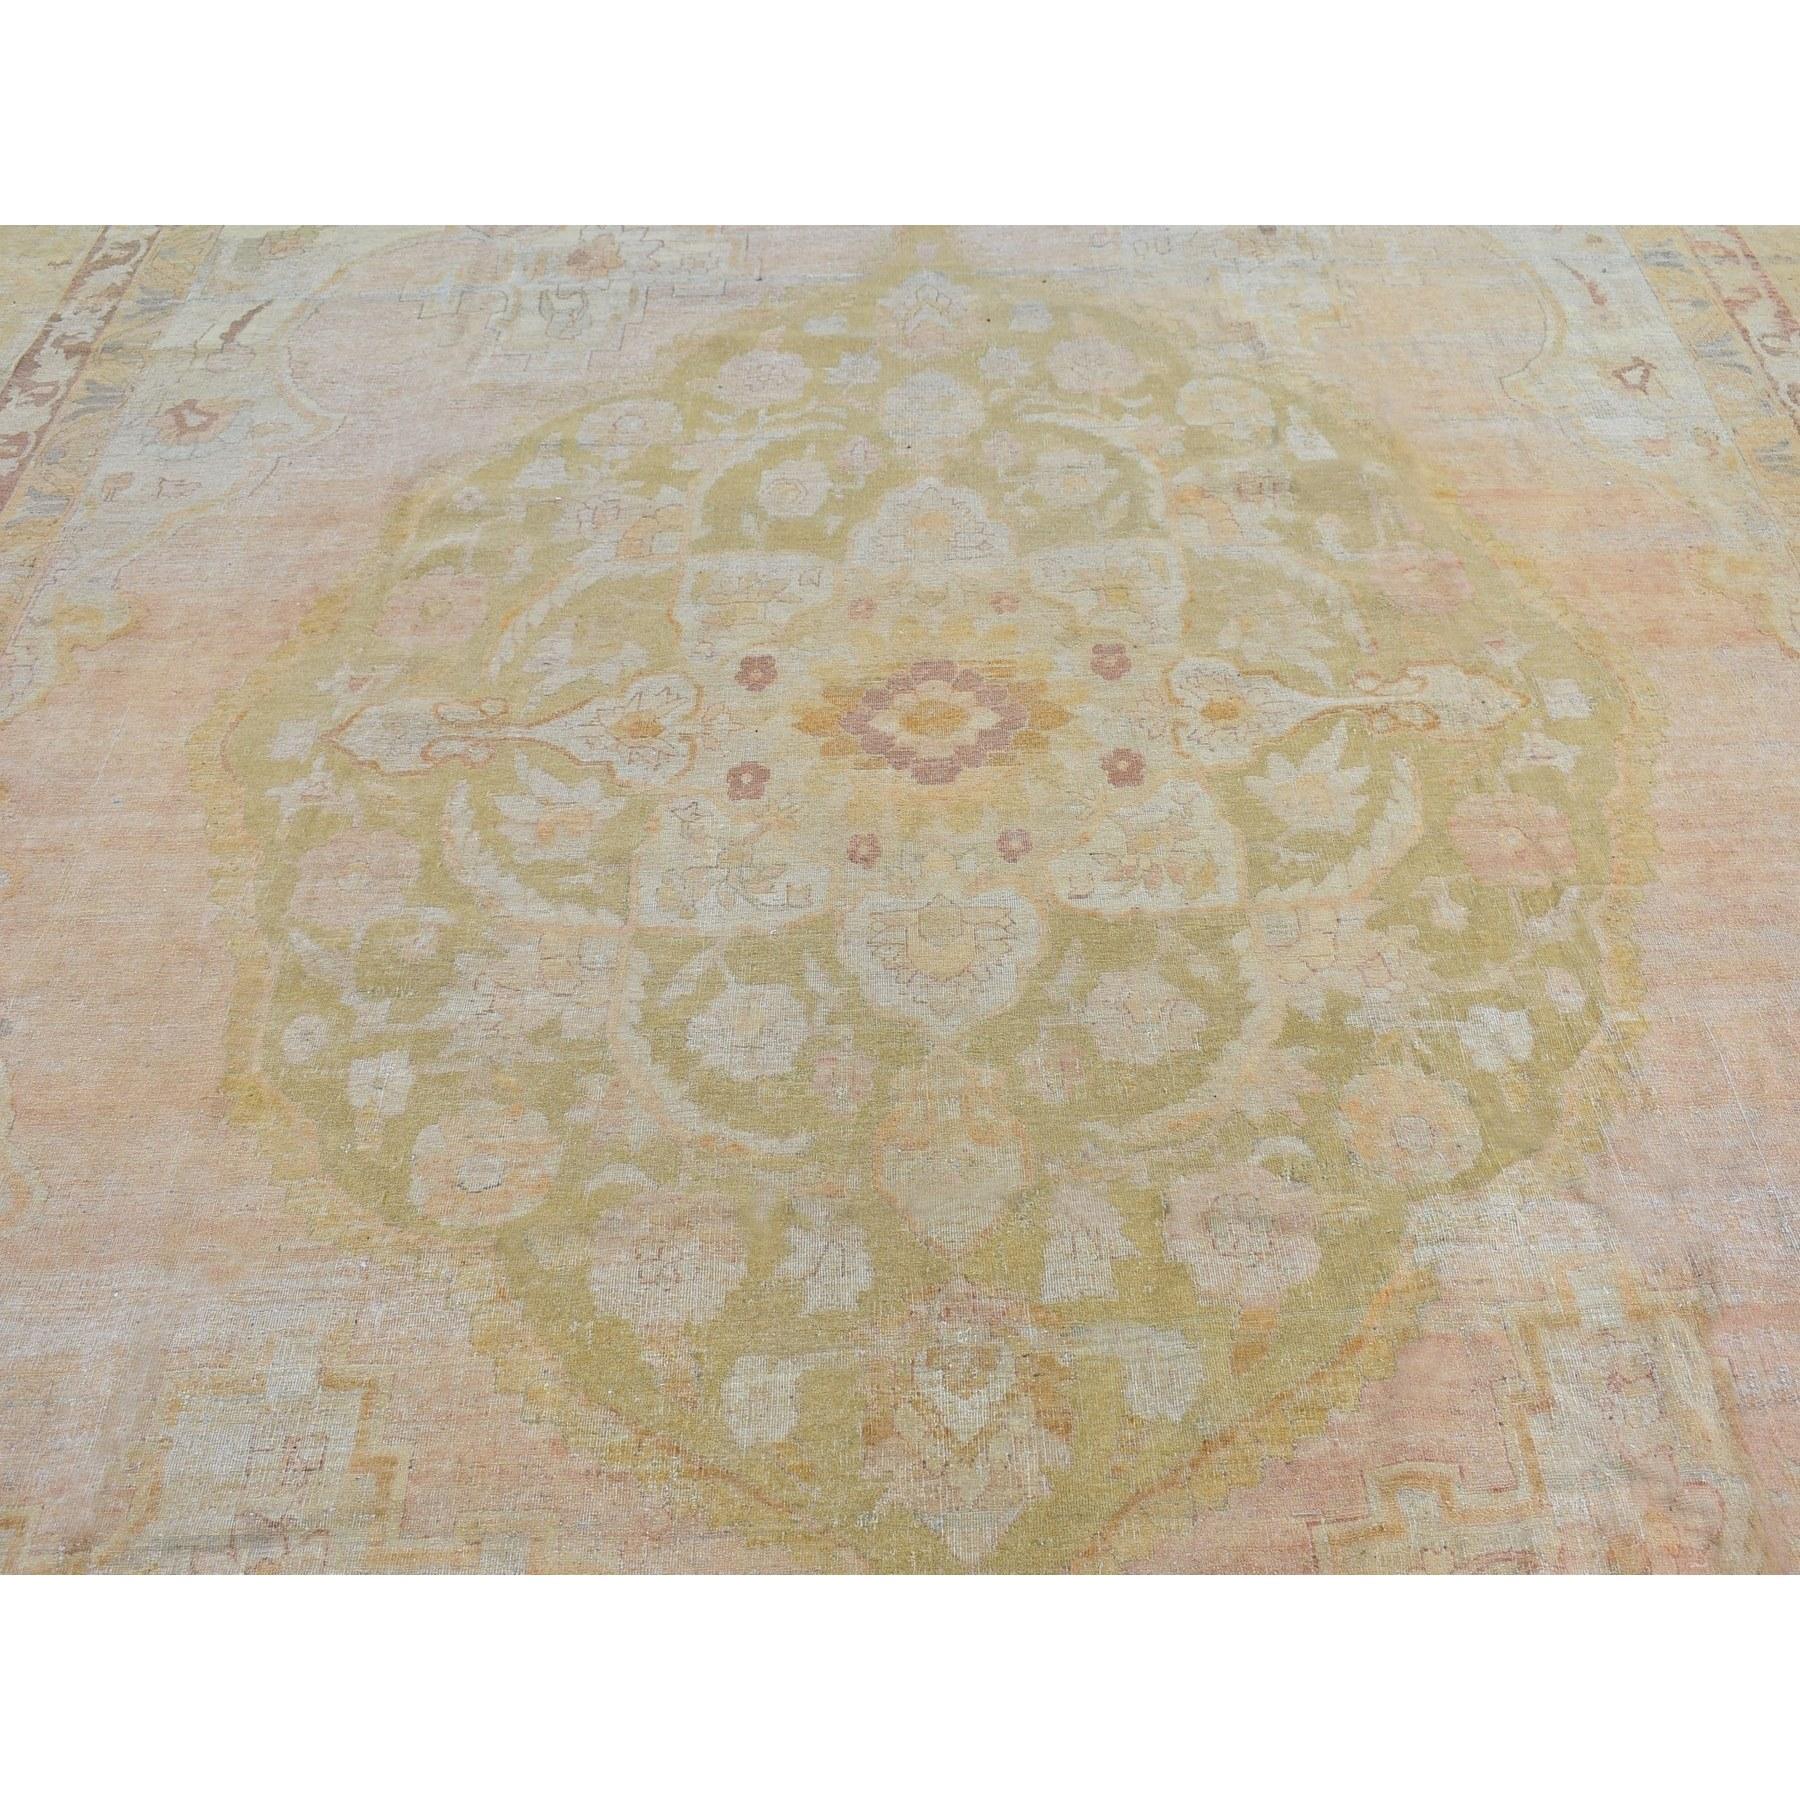 Indian Oversized Antique Agra Good Cond Soft Colors Even Wear Pure Wool Handknotted Rug For Sale